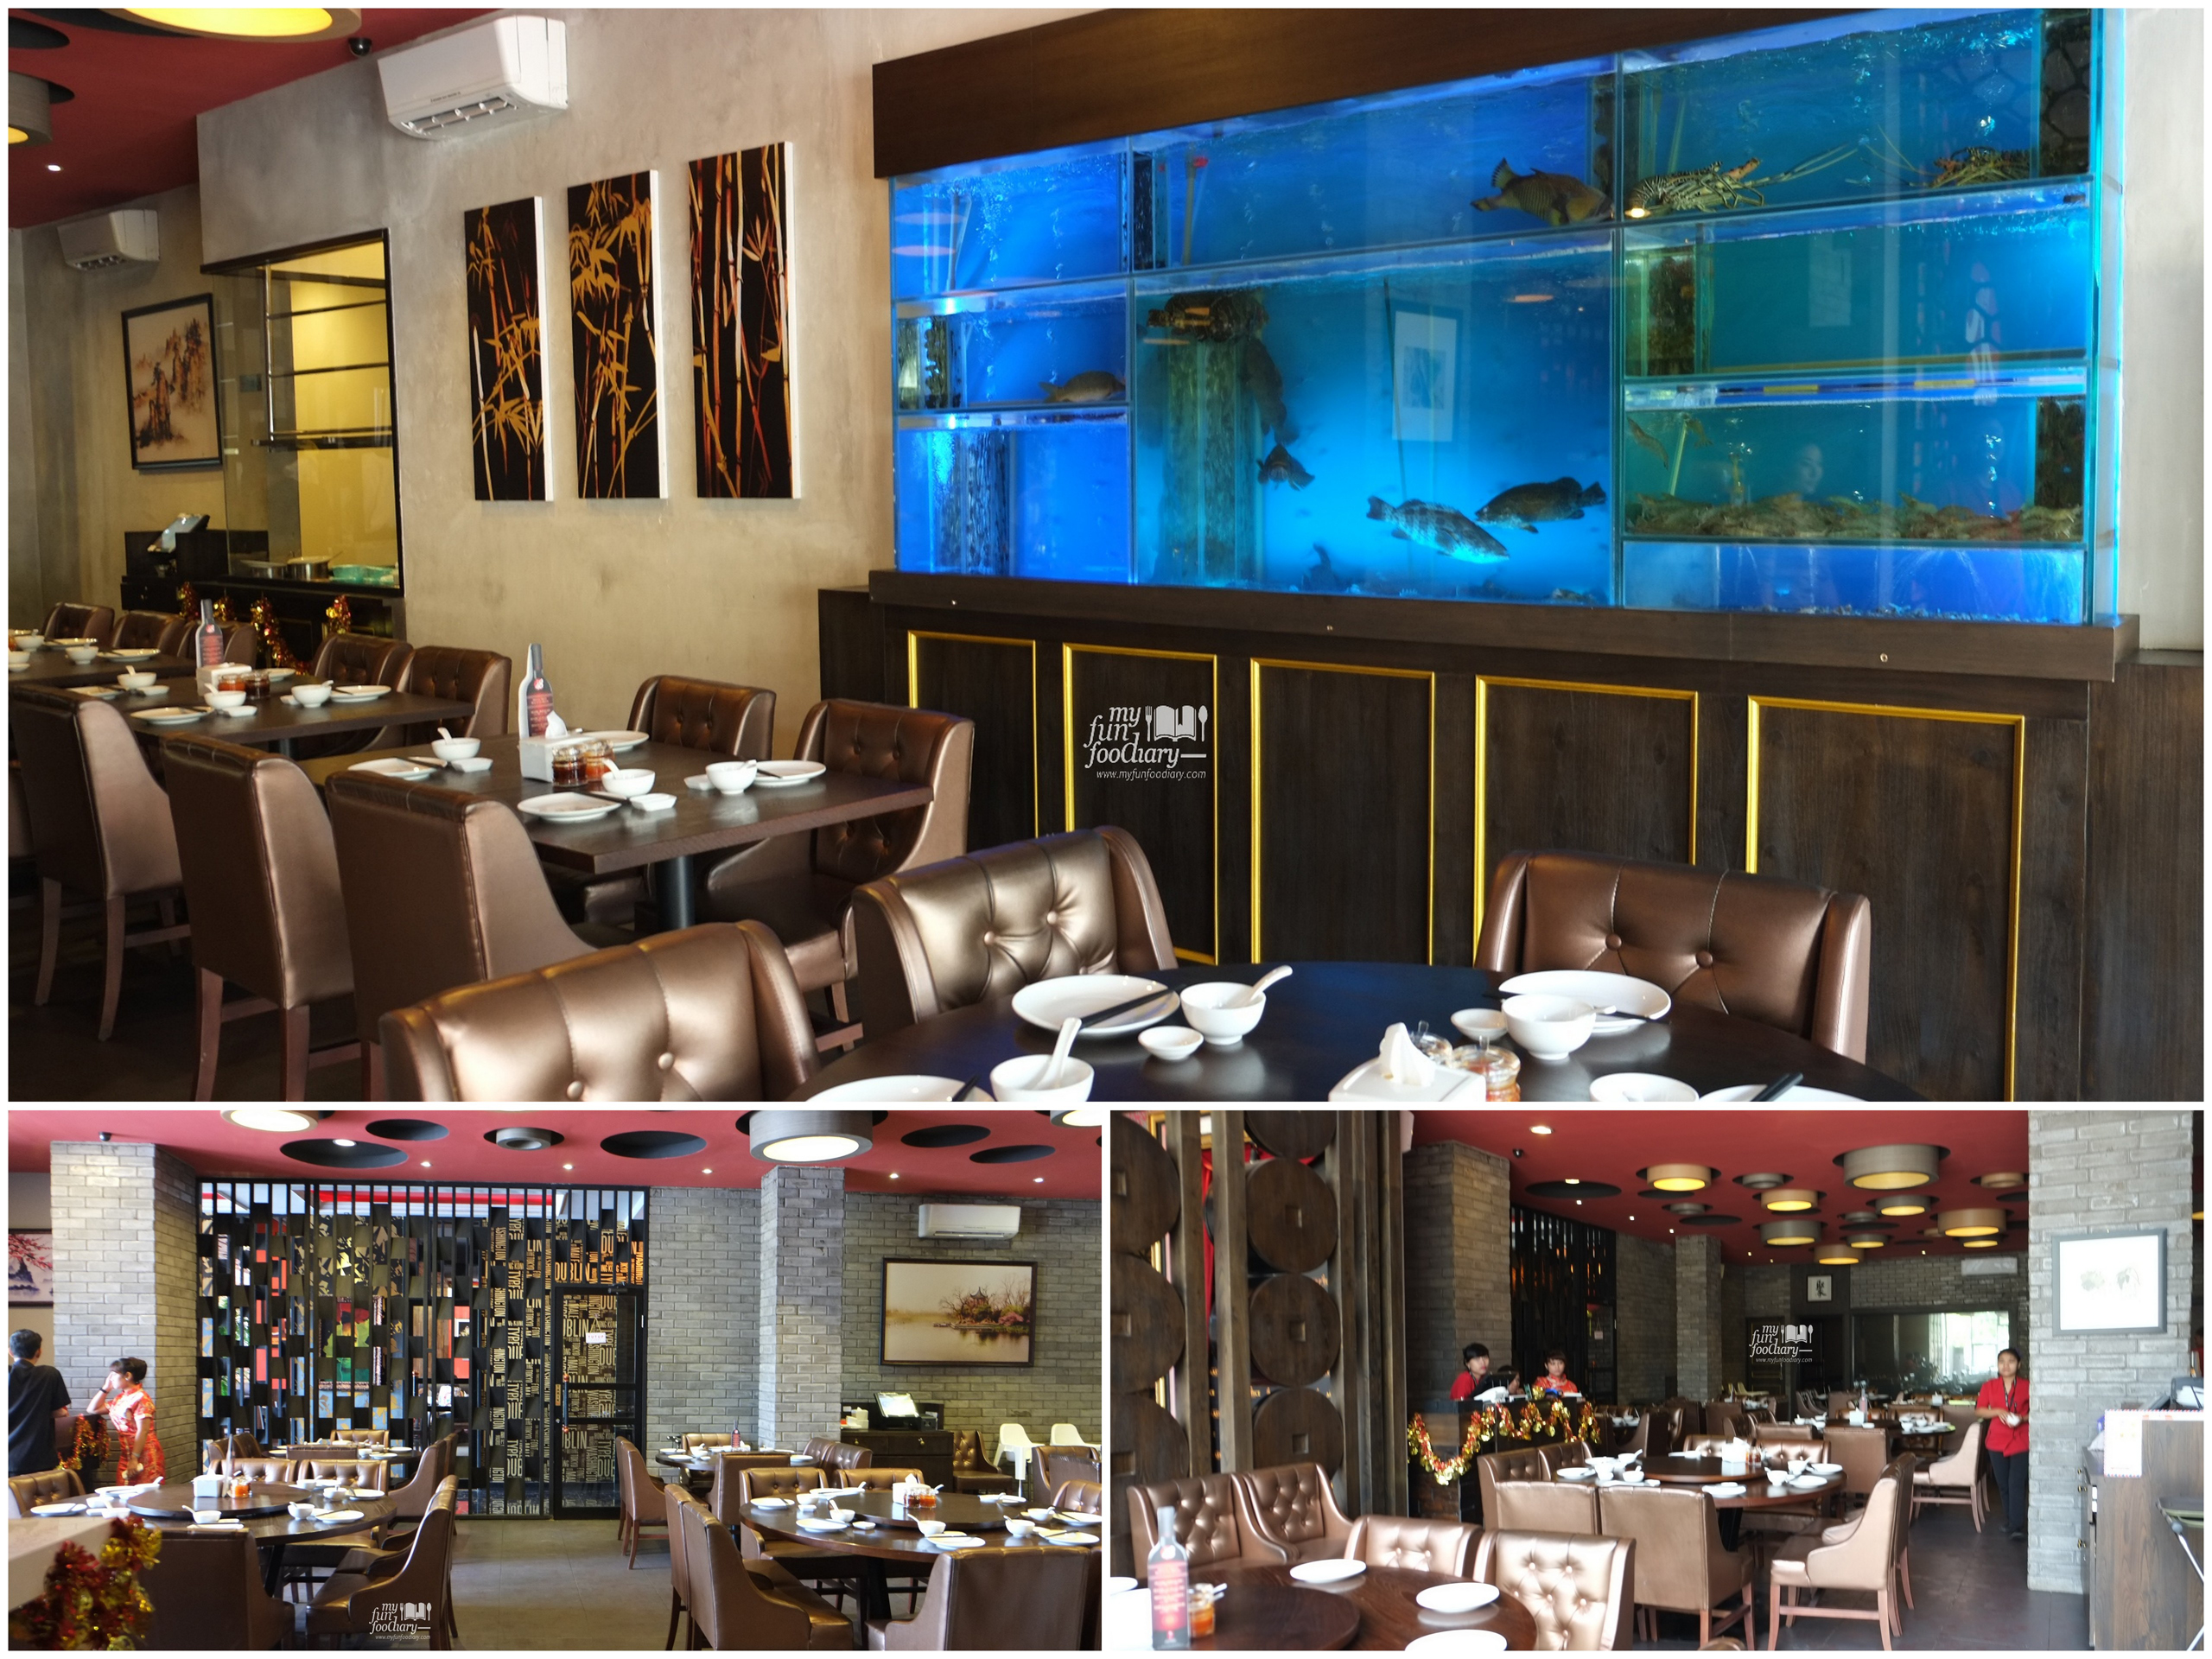 Ambiance at 48 Signature Restaurant by Myfunfoodiary - collage